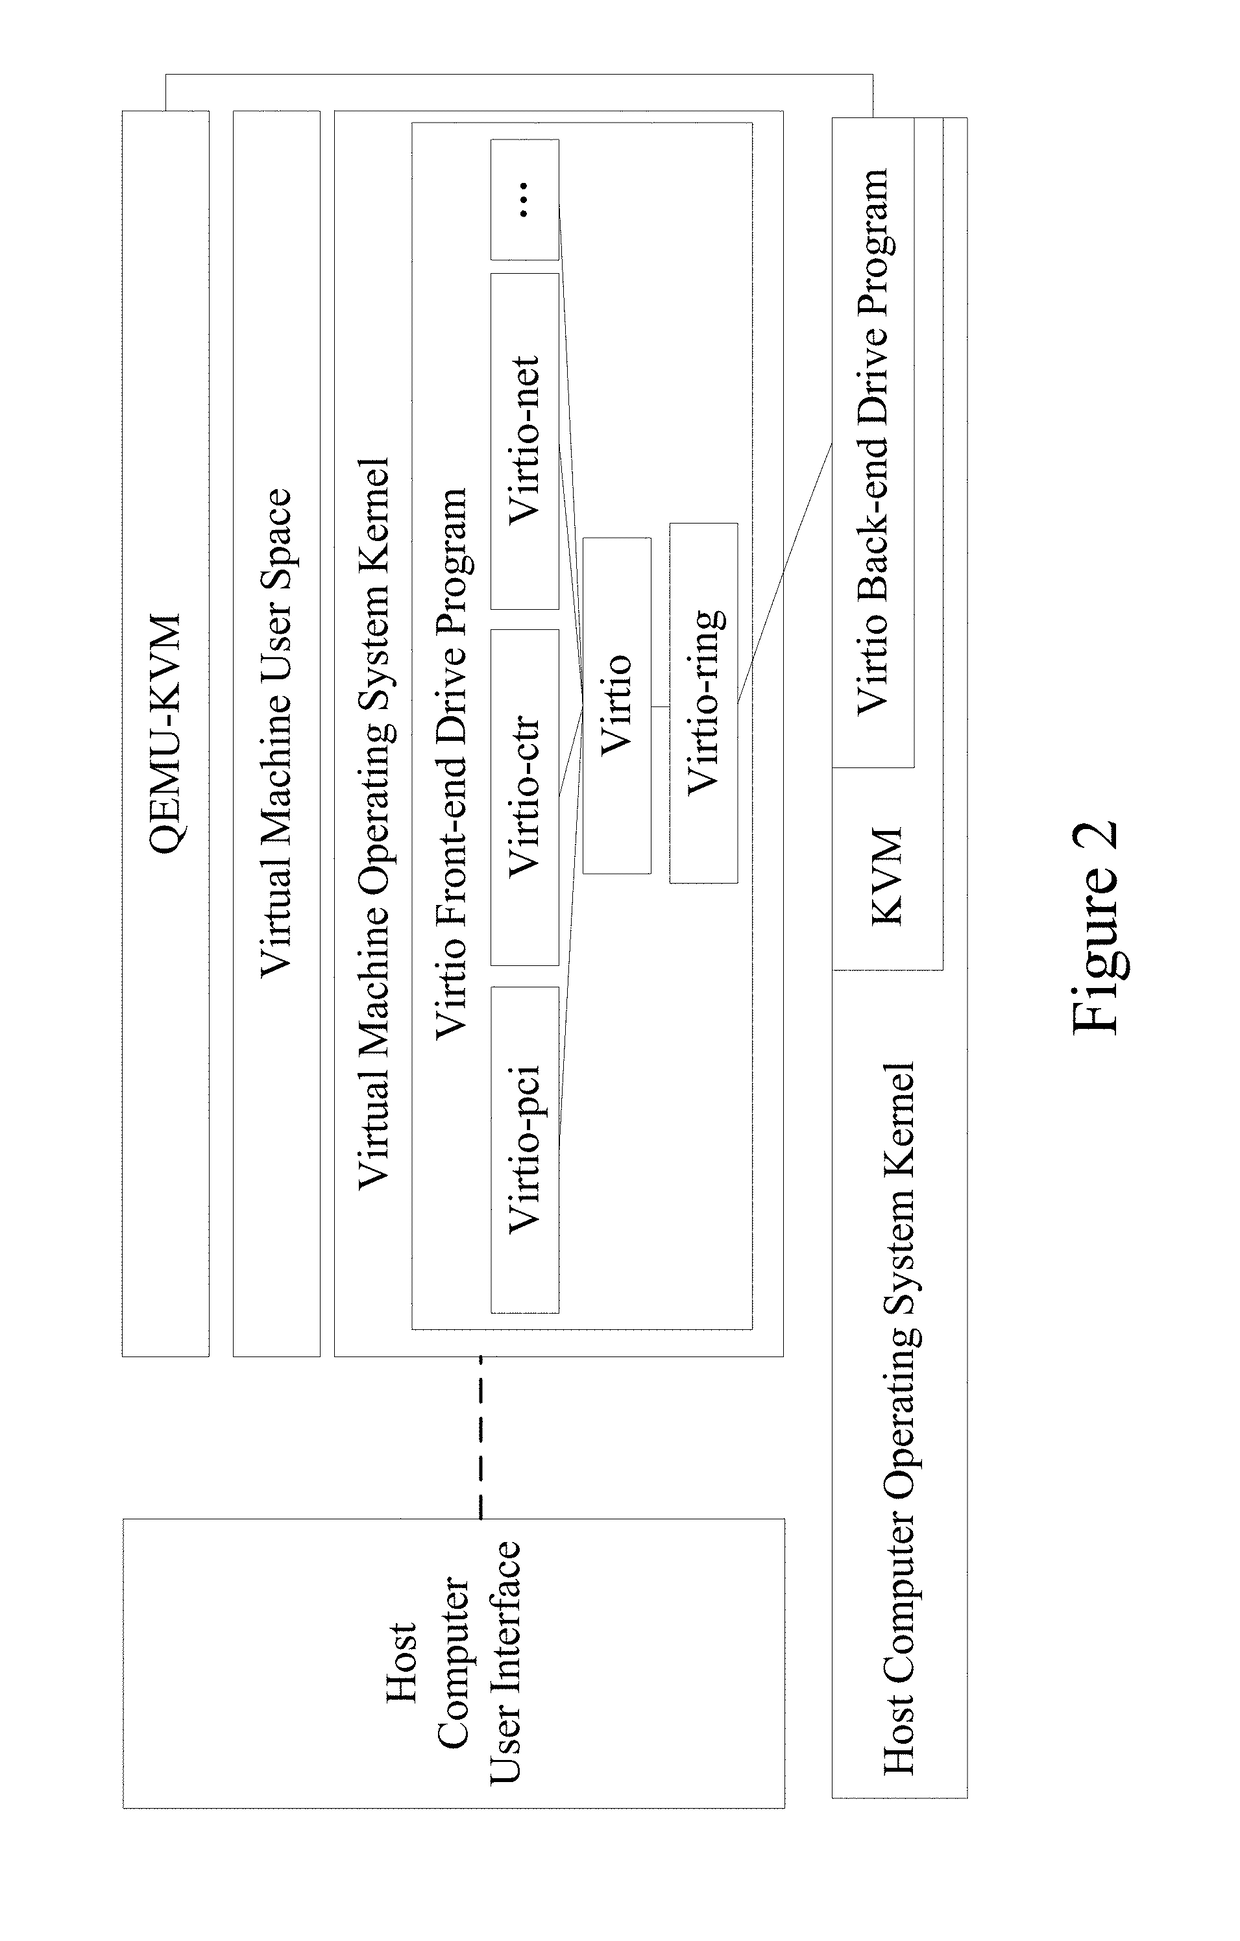 Method and system for checking revocation status of digital certificates in a virtualization environment